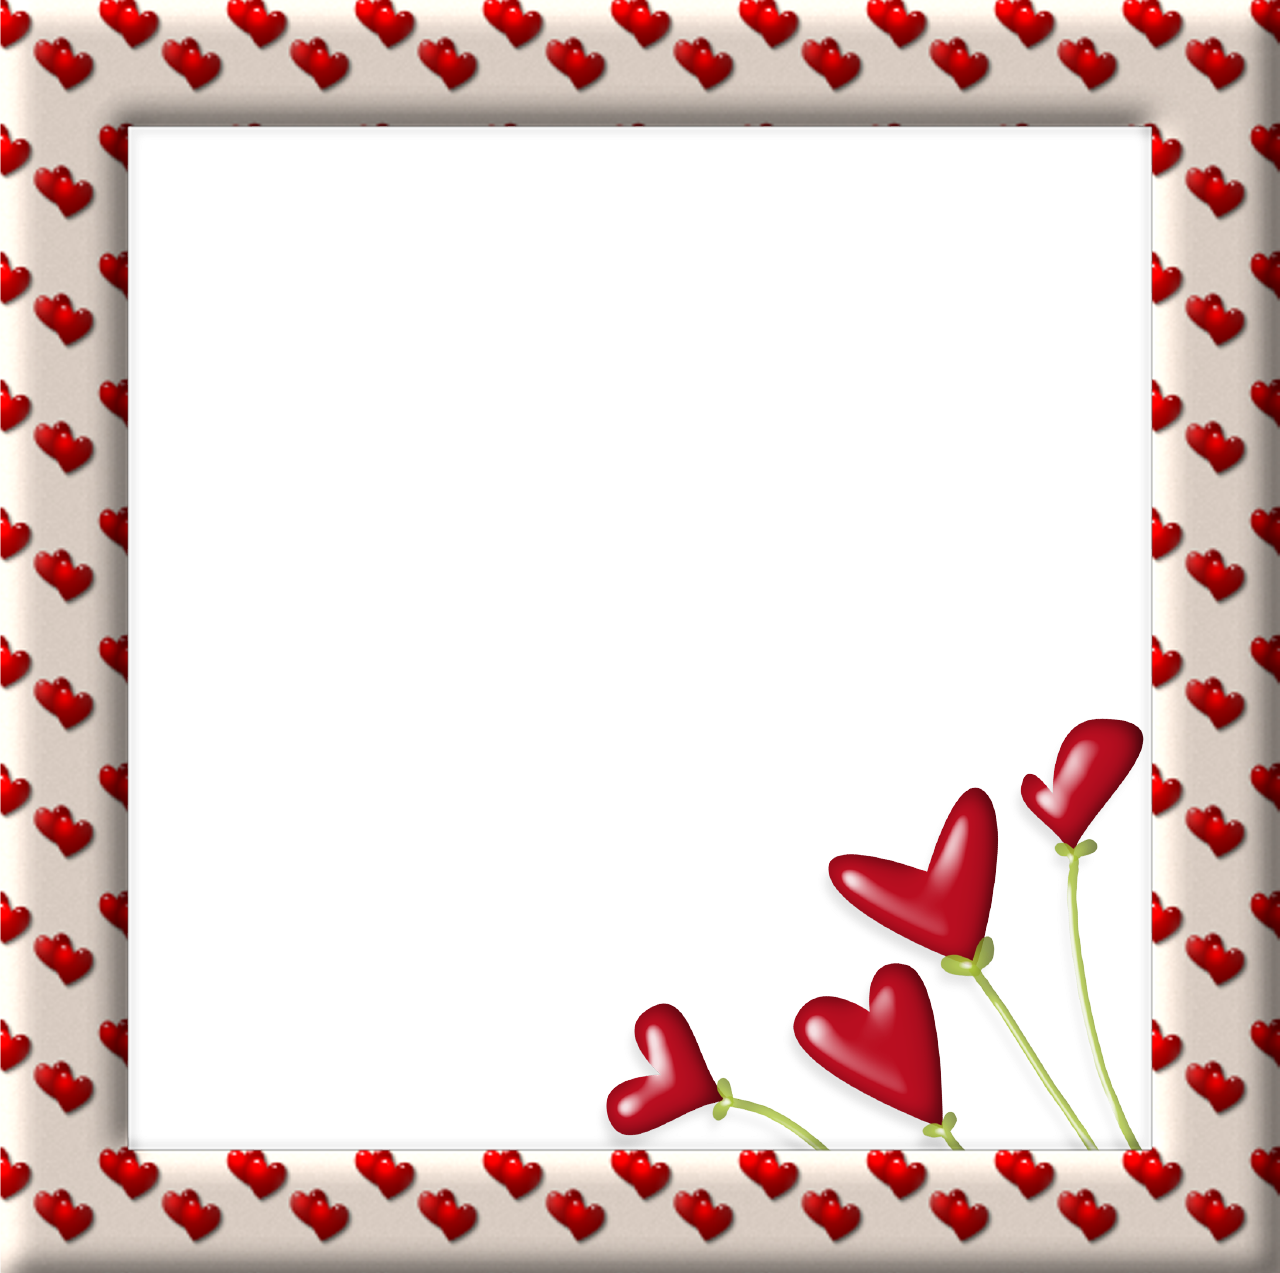 More Information - Picture Frame (1280x1273)